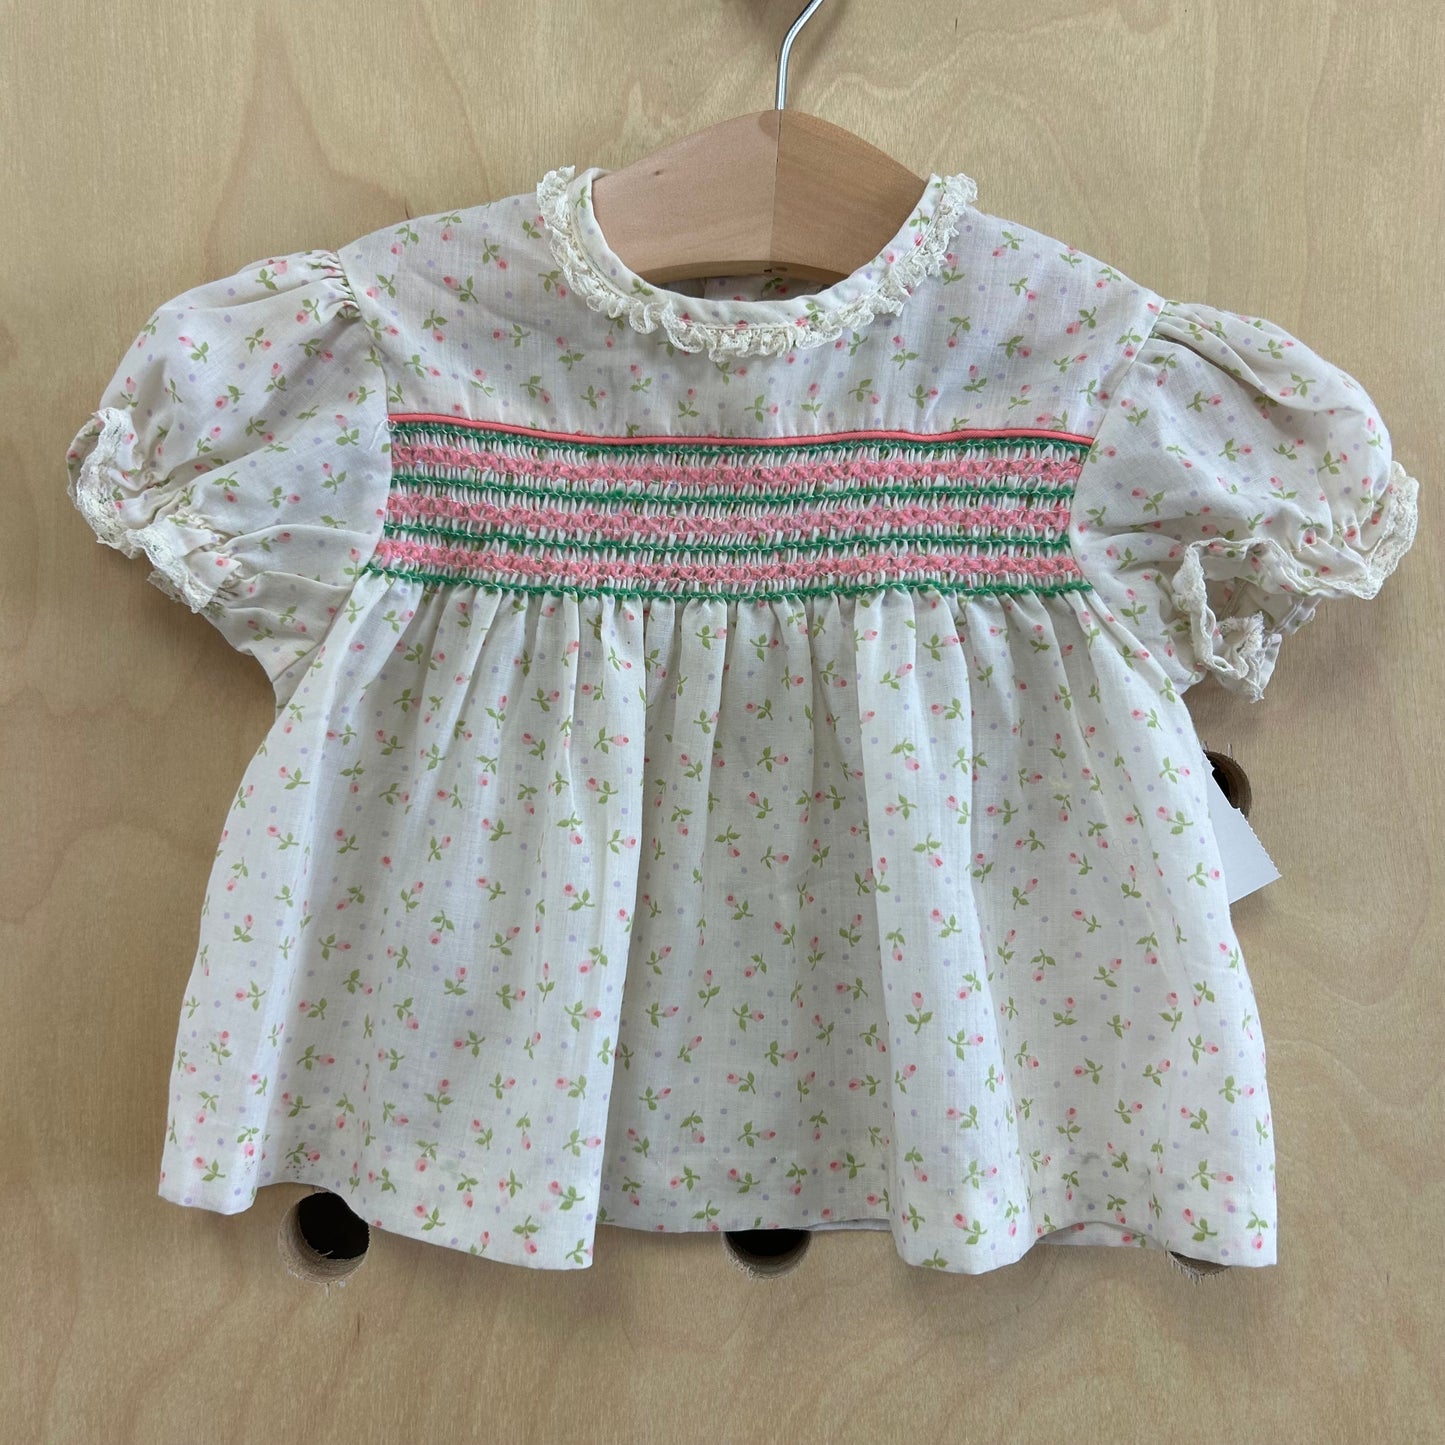 Cream Floral Smocked Top